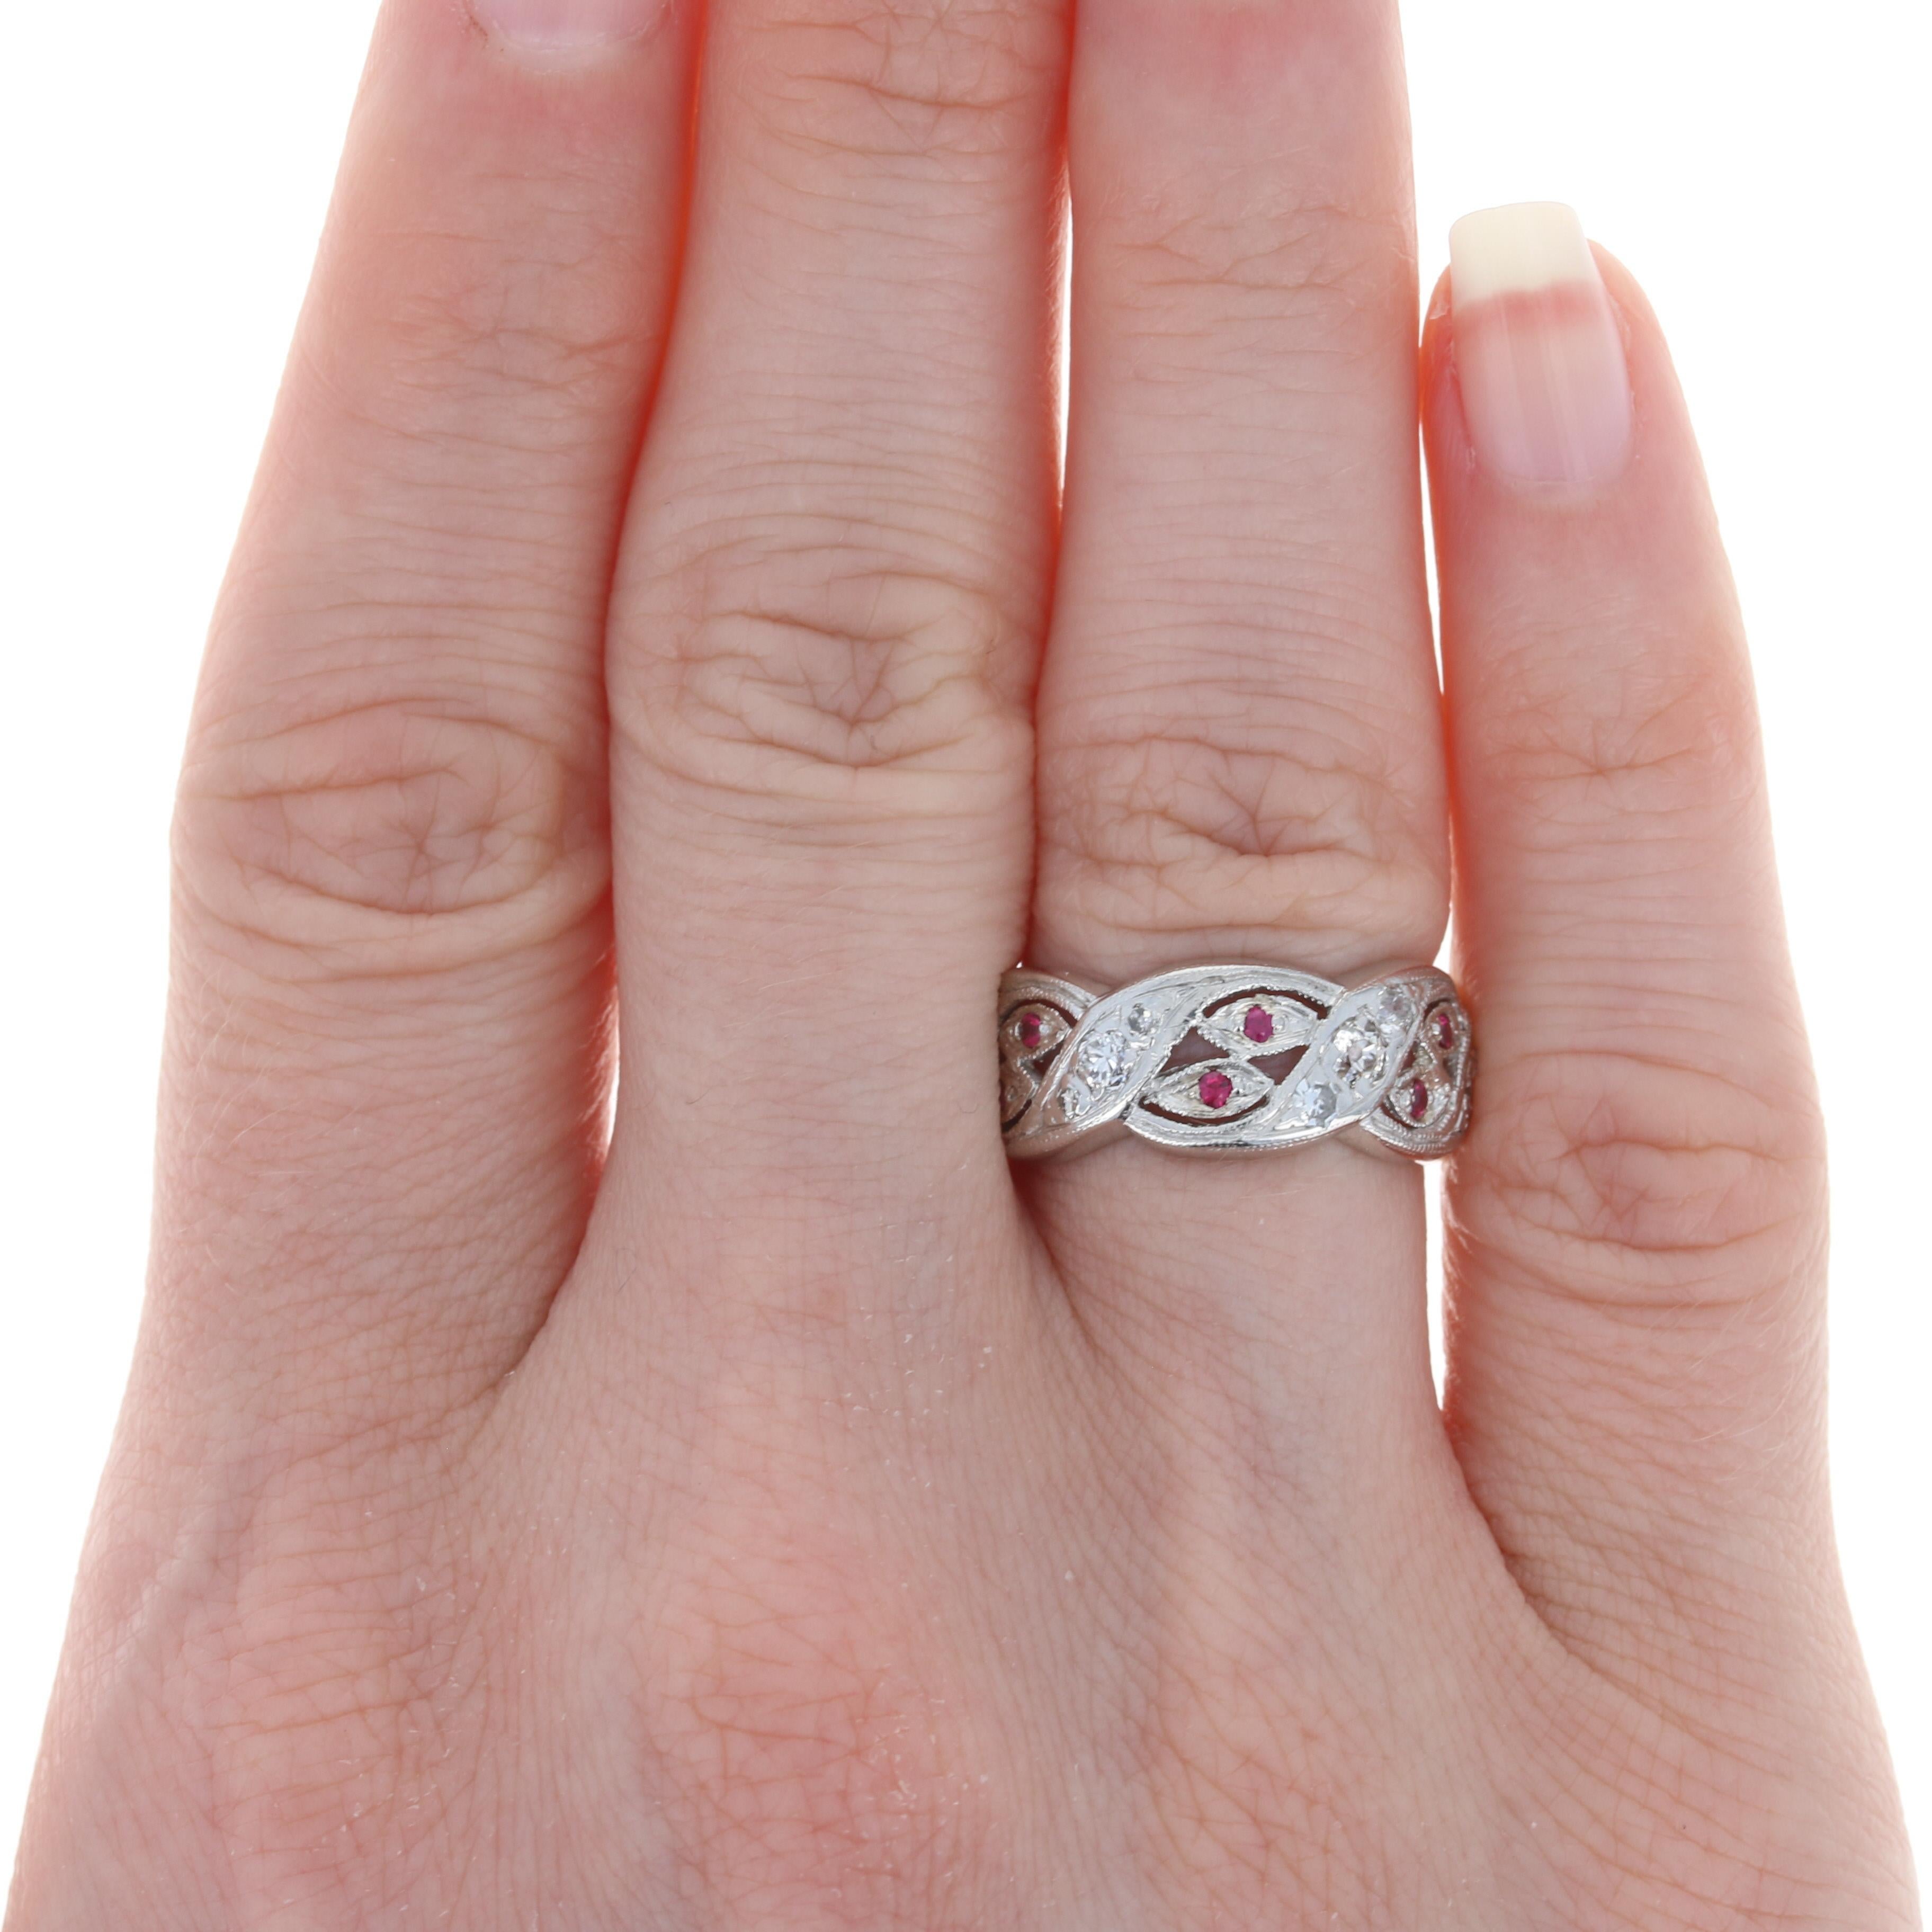 Retro romance to light up the night! Created in the 1940s - 1950s, this stunning platinum band features a meaningful eternity silhouette graced by a wrapped ribbon design set with a sparkling array of white diamonds and majestic rubies that are